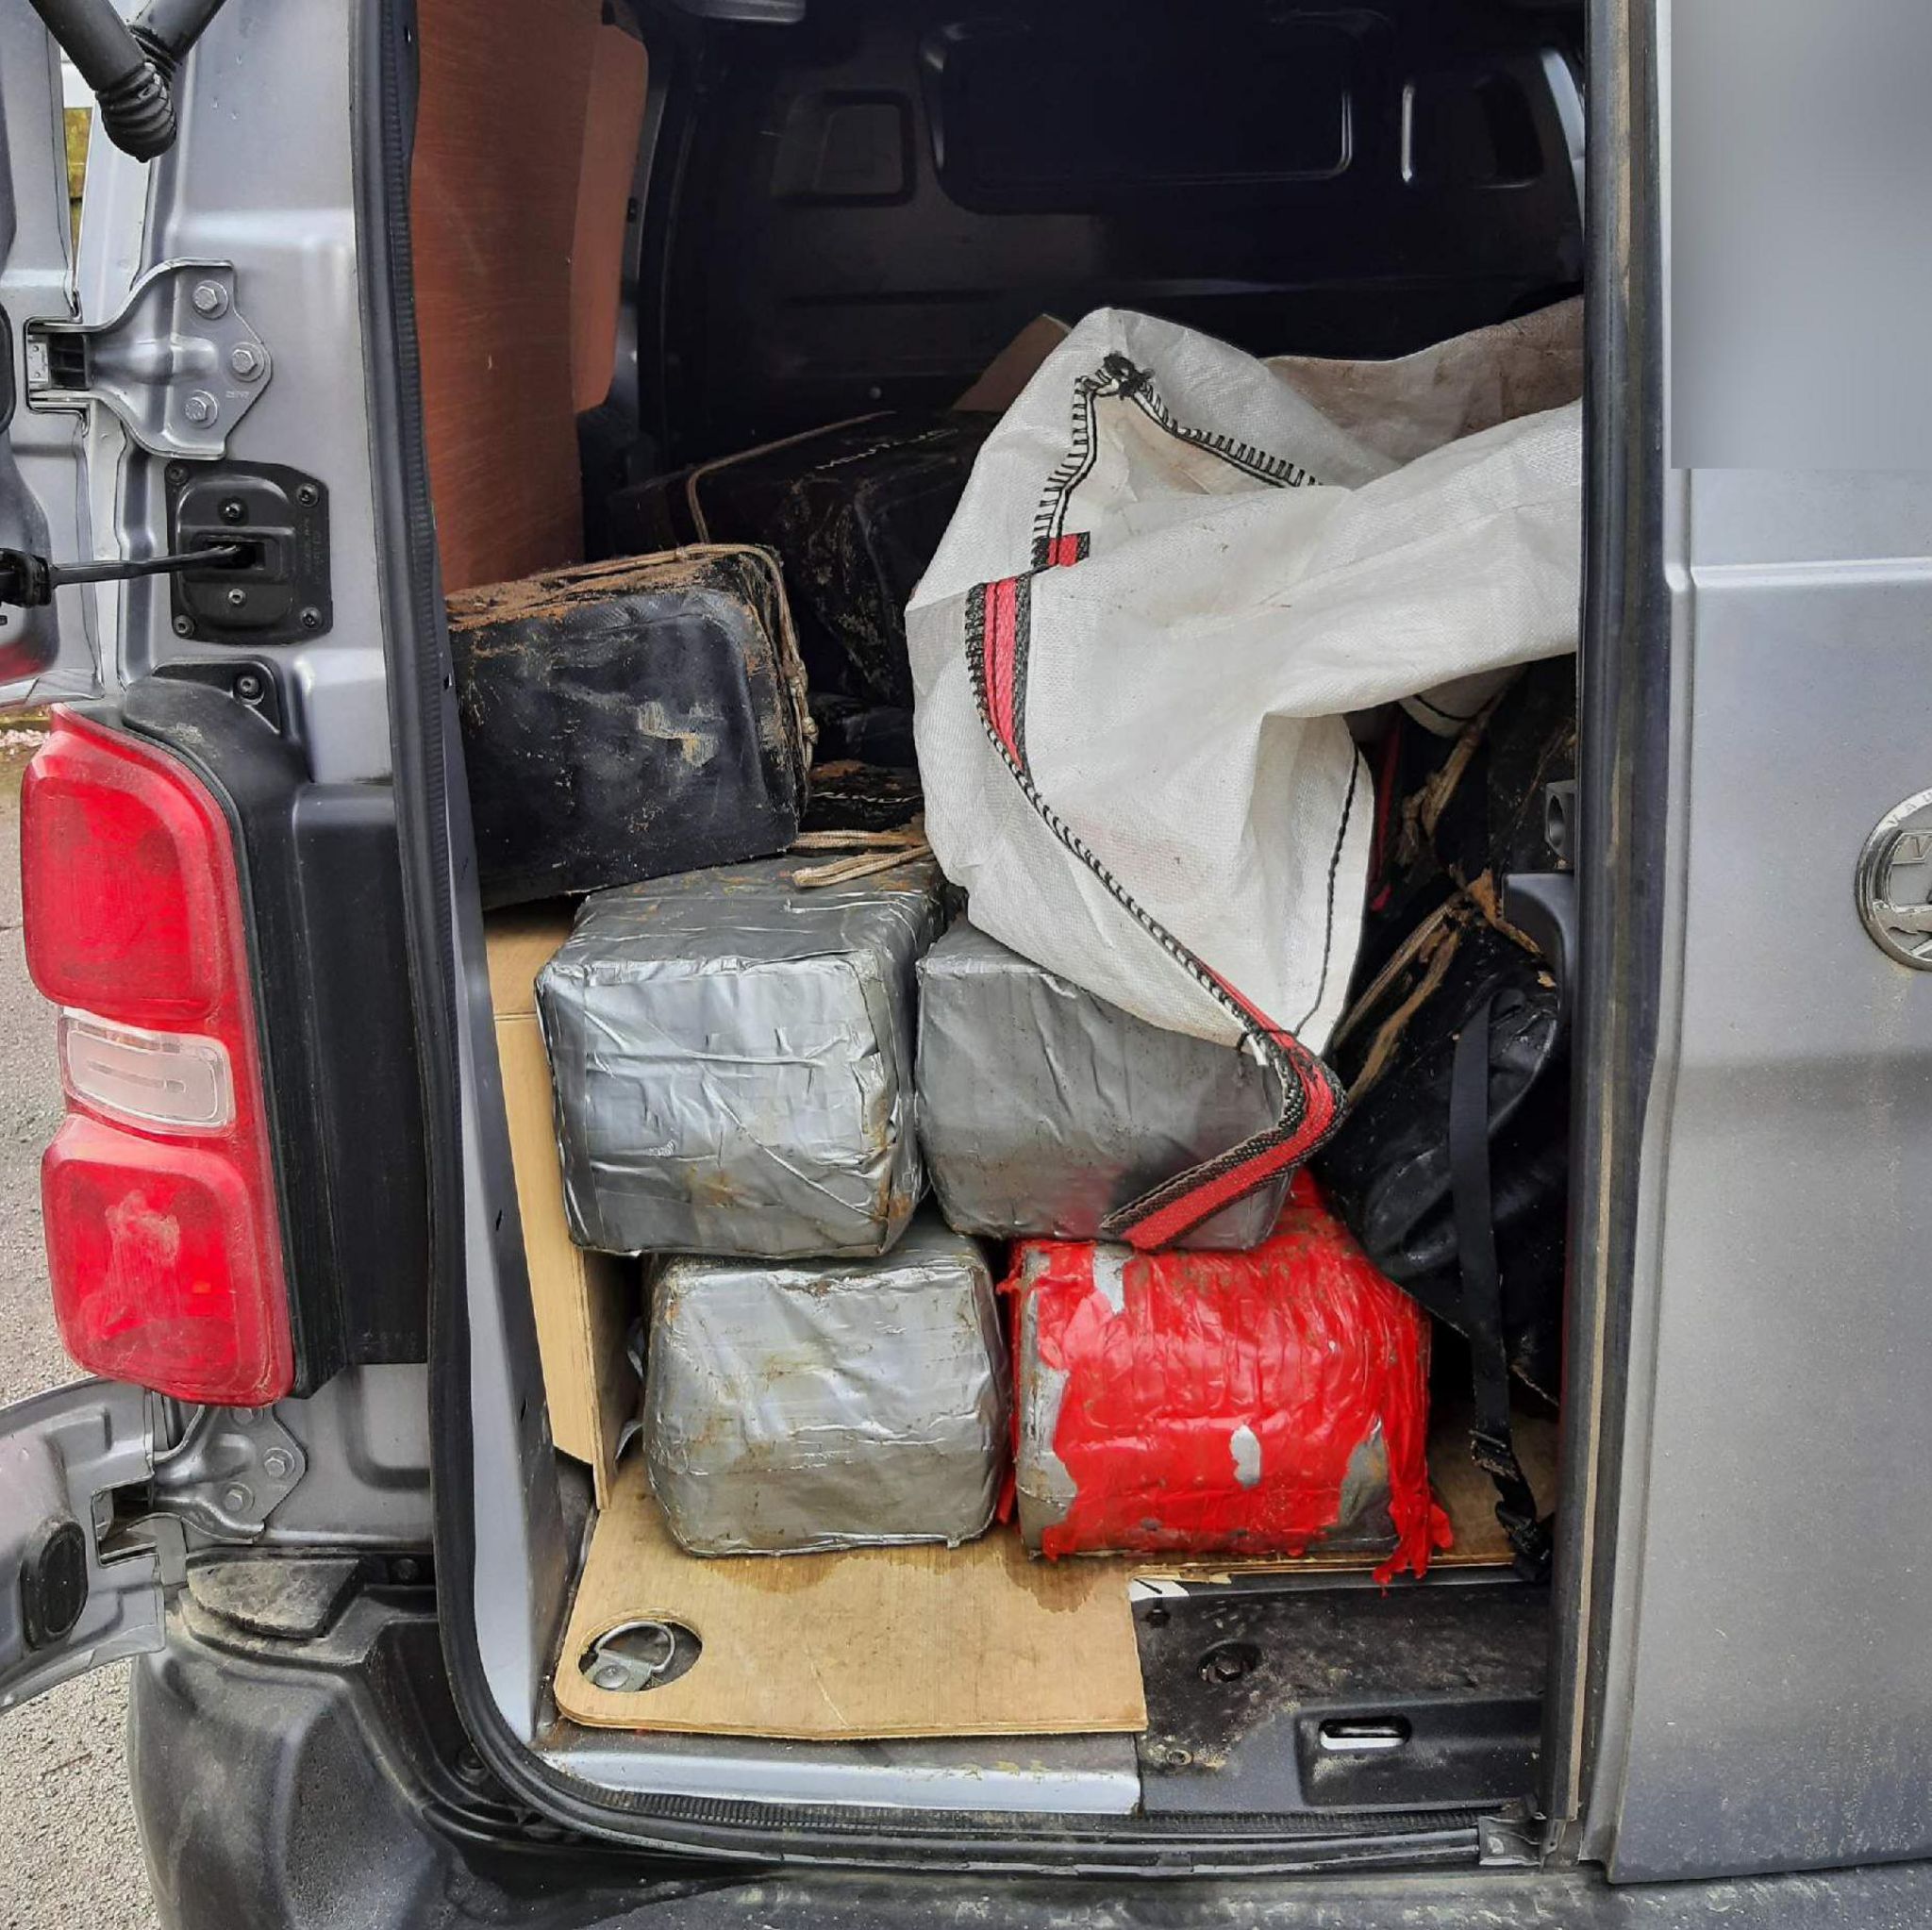 Parcels stacked up in the back of a grey van with door open